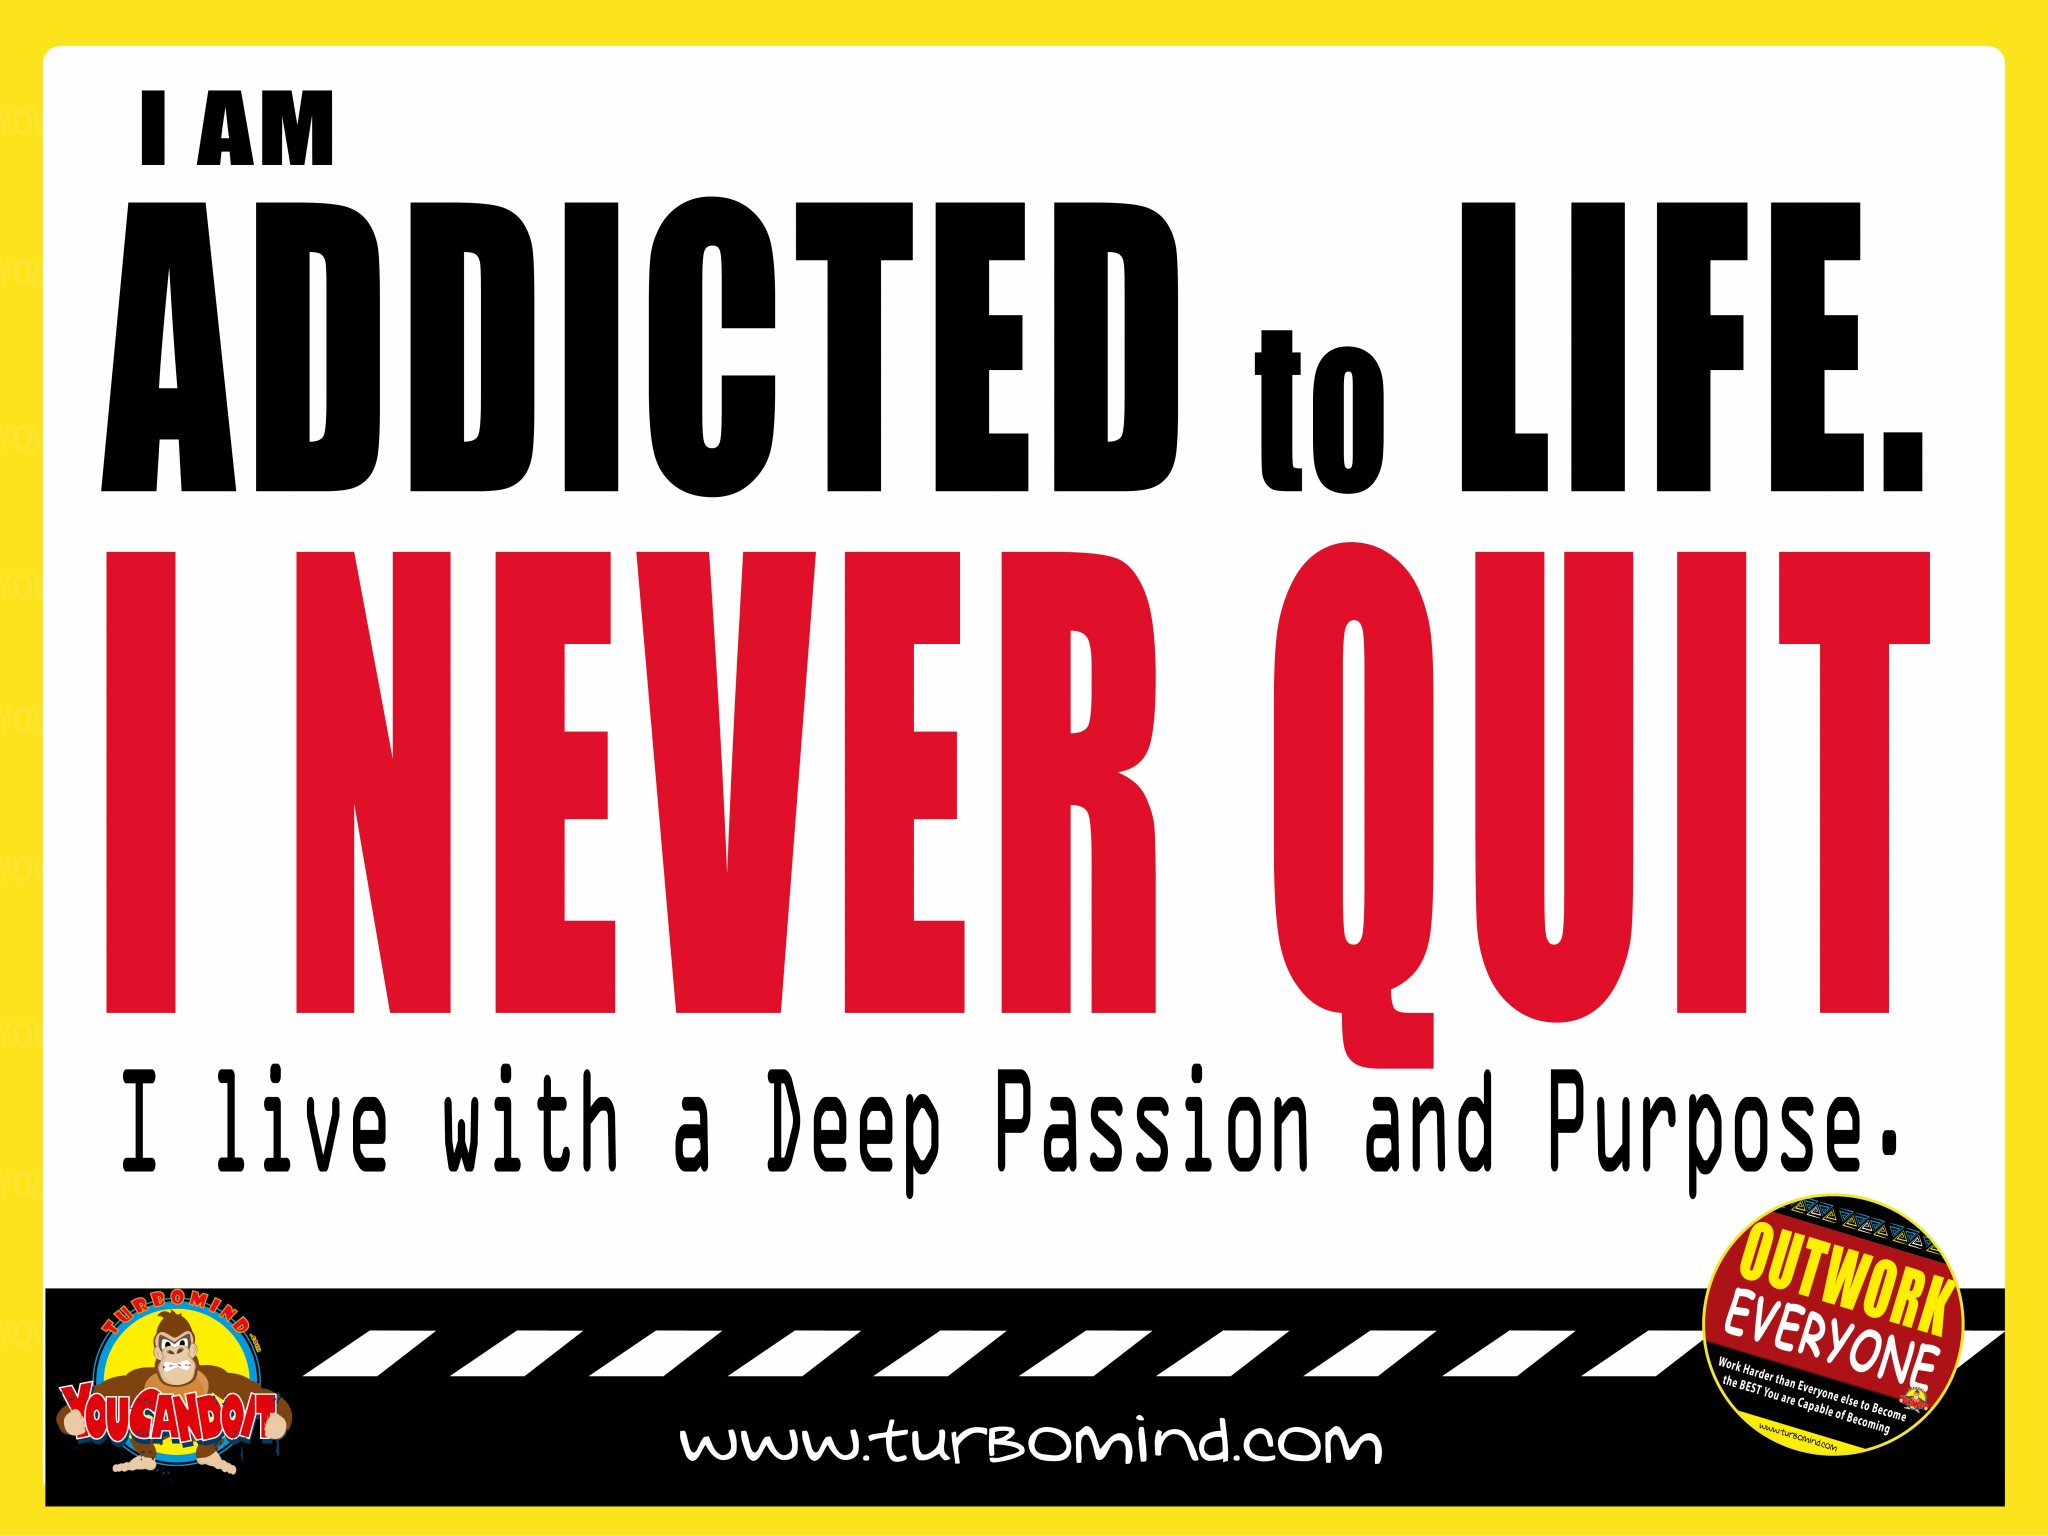 "I am addicted to Life", https://www.turbomind.com/